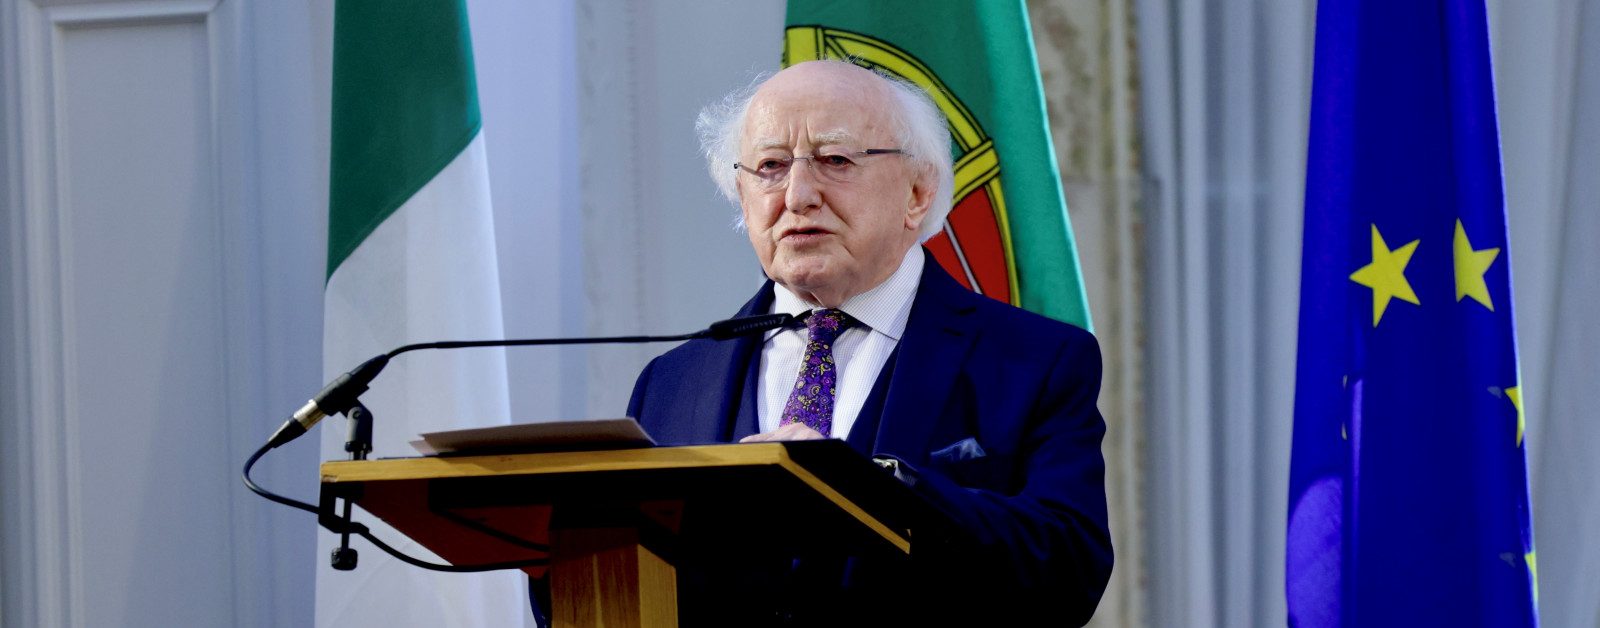 President Michael D. Higgins today addressed a special virtual May Day celebration